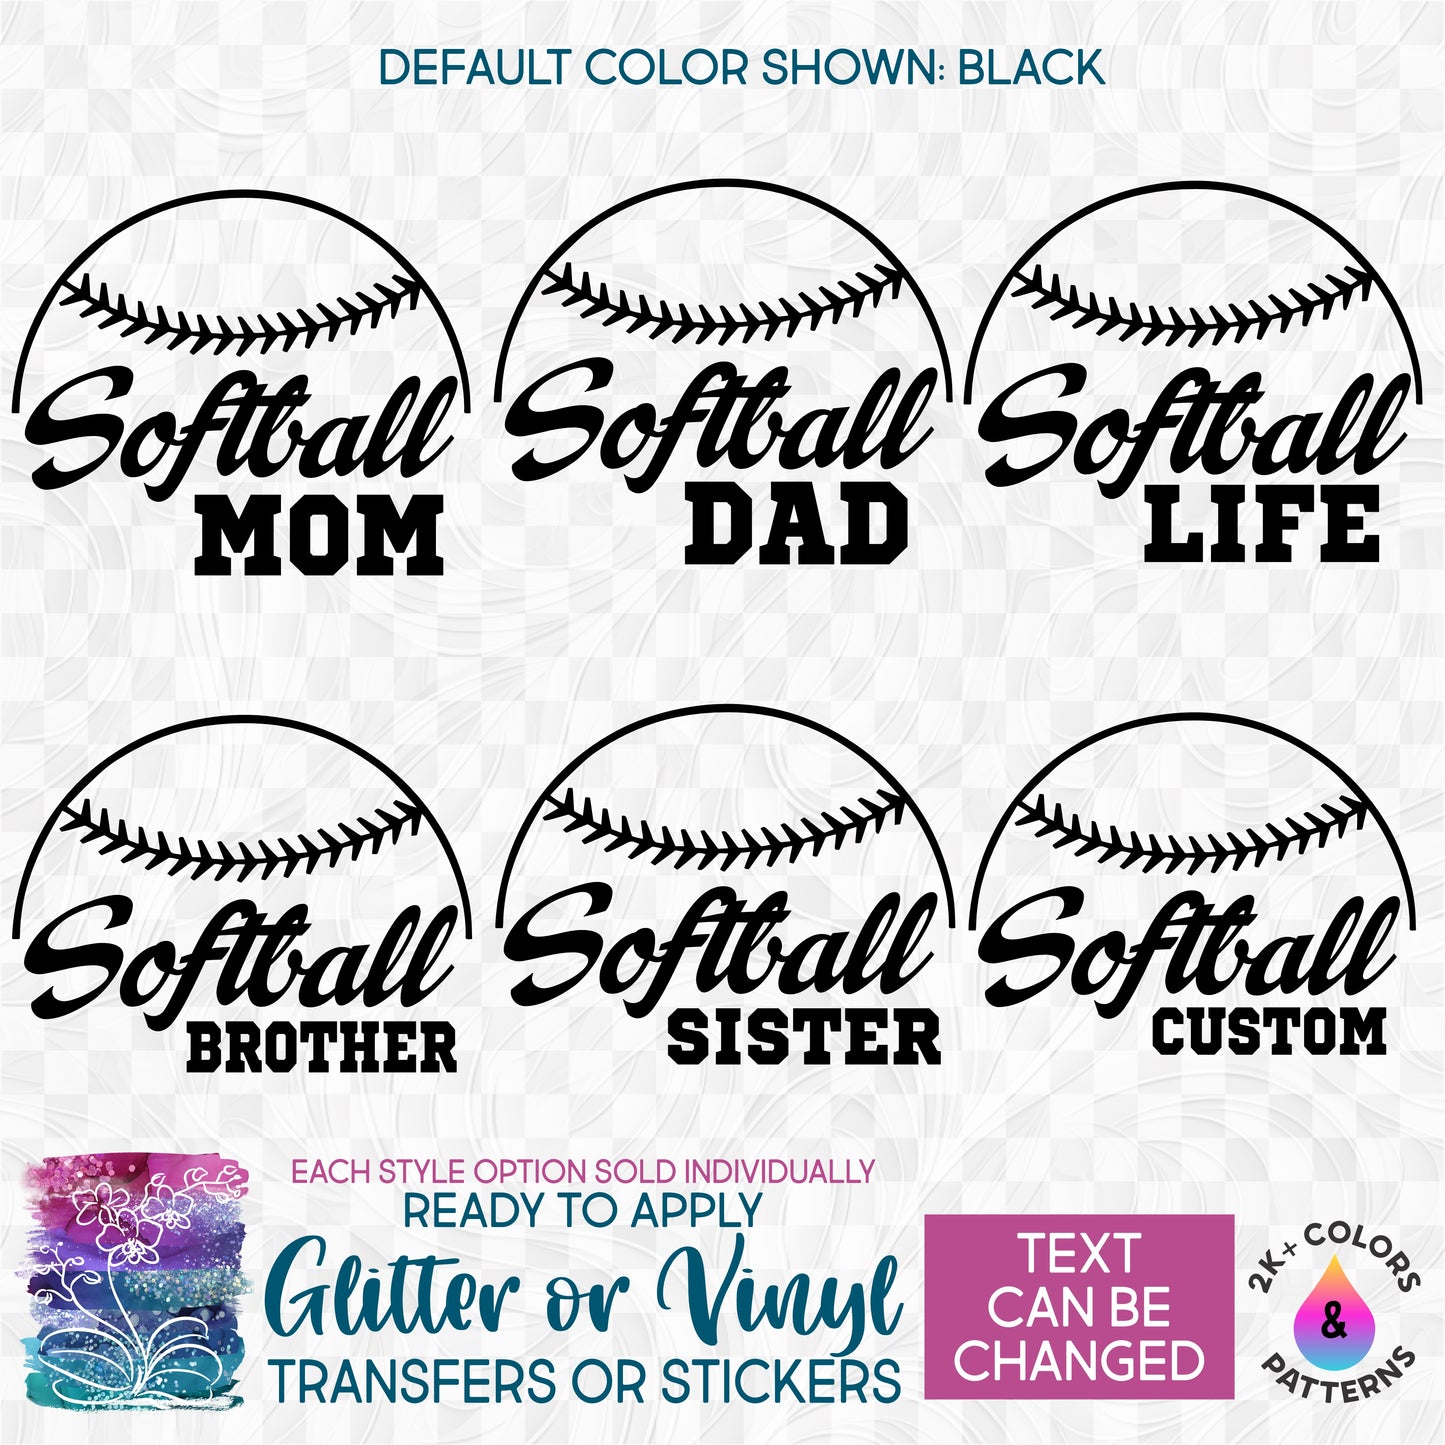 Softball Family Mom Made-to-Order Iron-On Transfer or Sticker